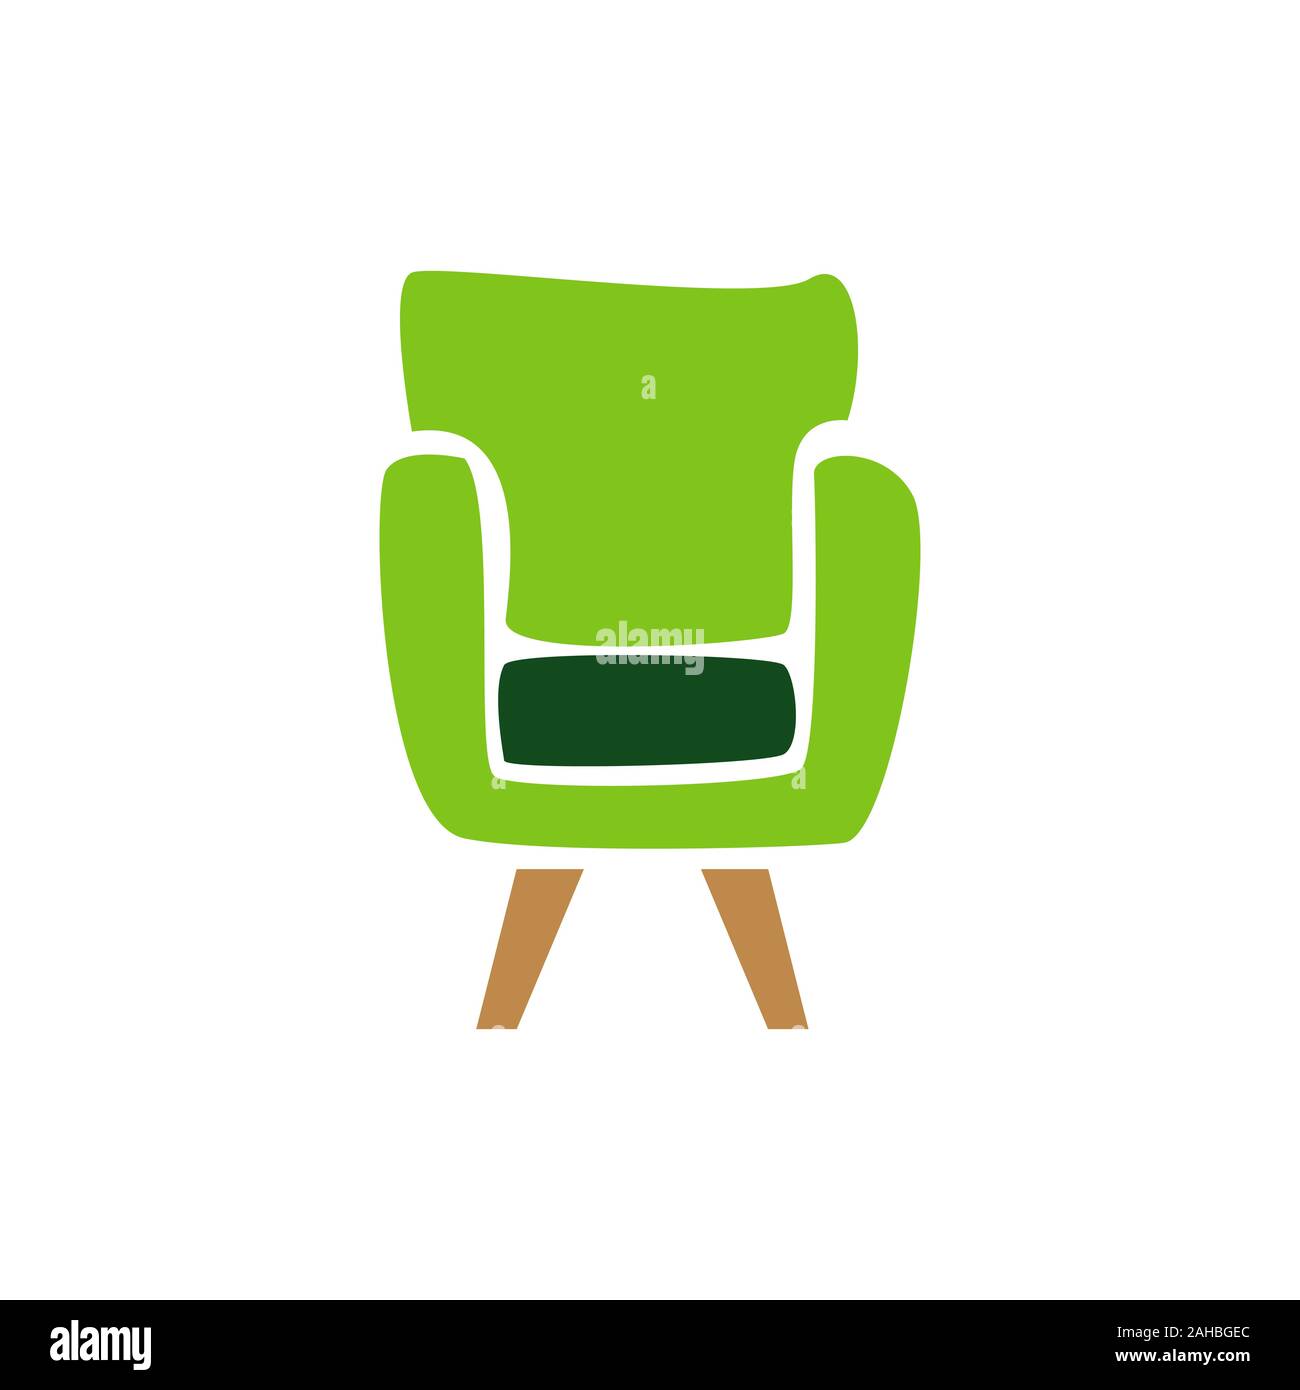 furniture logo design vector Symbol and icon of chairs sofas tables home interior furnishings Stock Vector